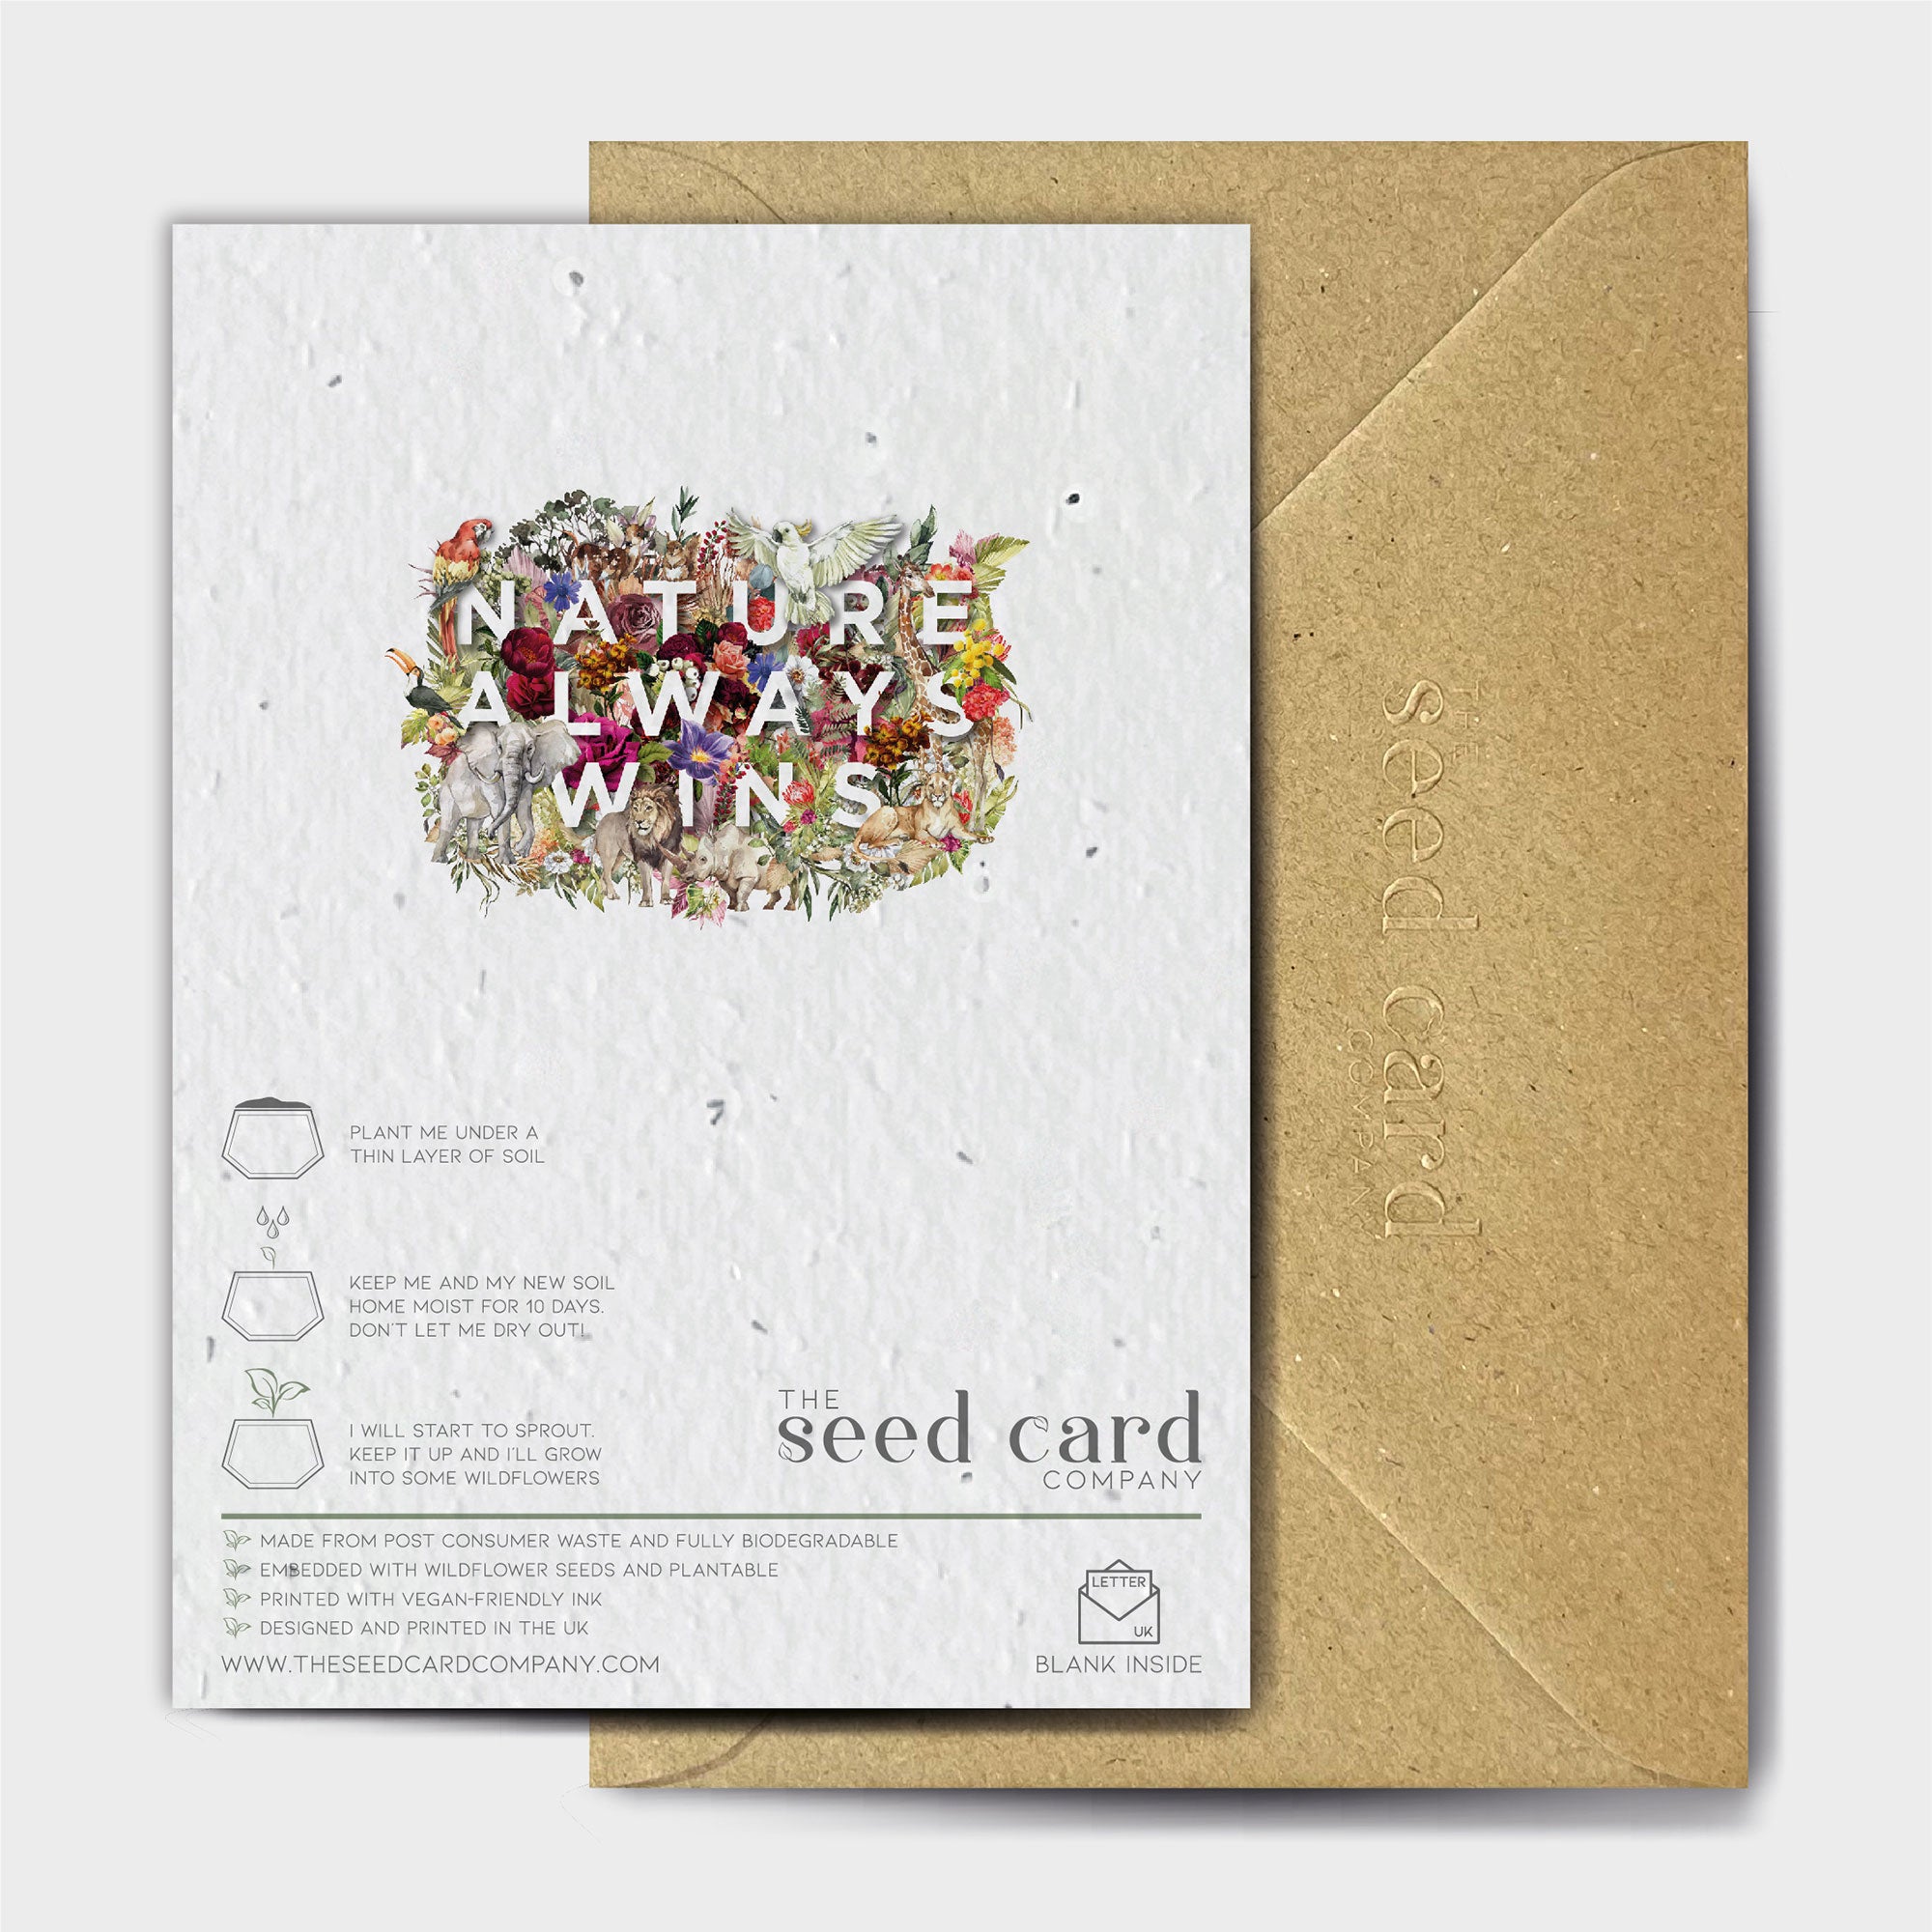 Shop online Moody Always Wins - 100% biodegradable seed-embedded cards Shop -The Seed Card Company